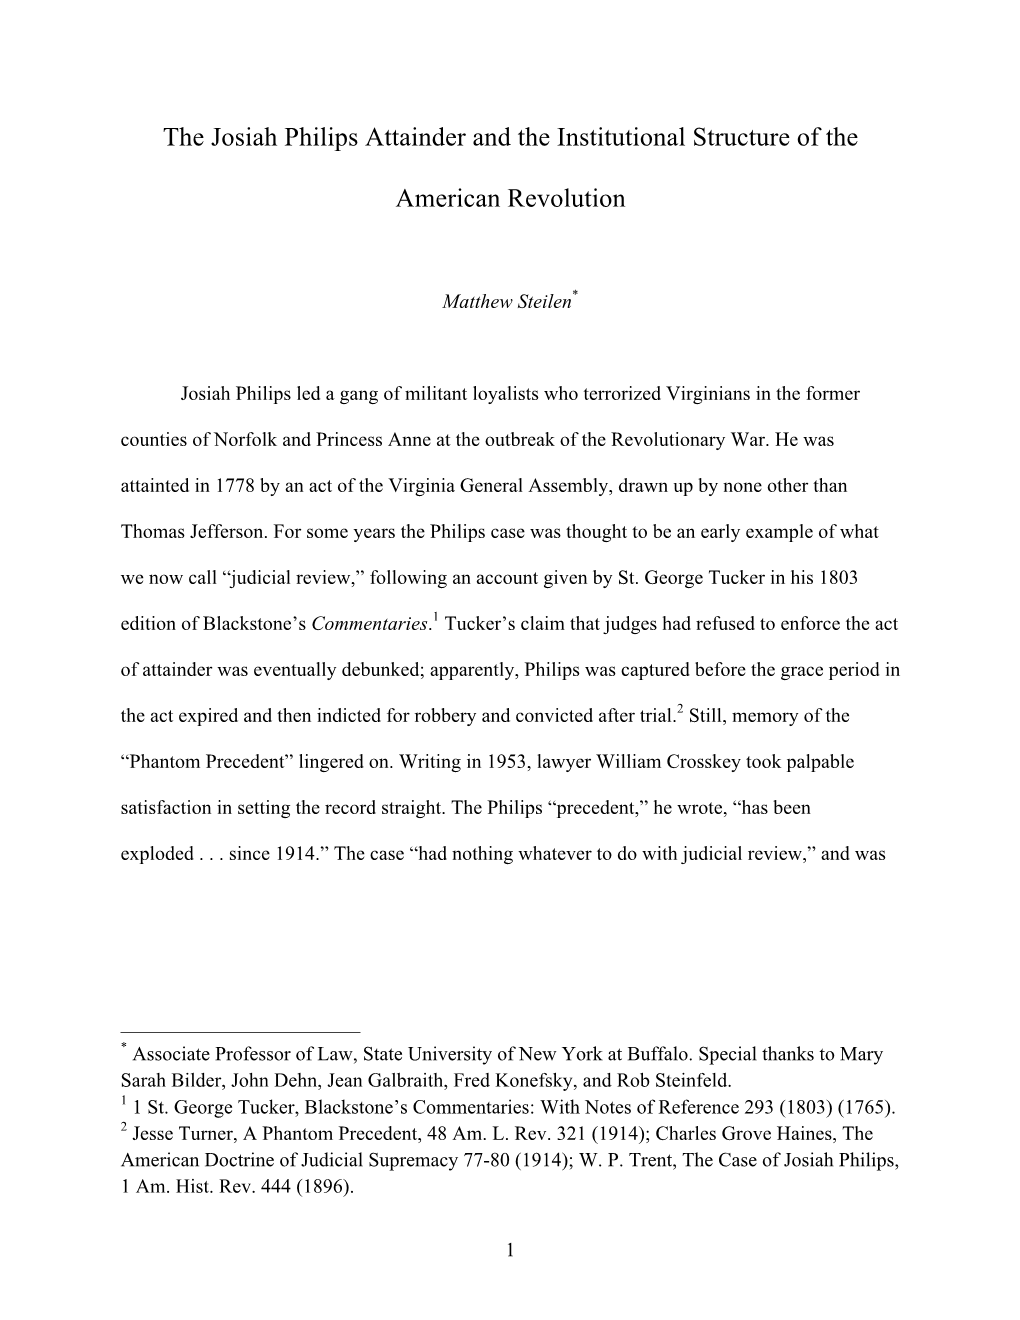 The Josiah Philips Attainder and the Institutional Structure of the American Revolution